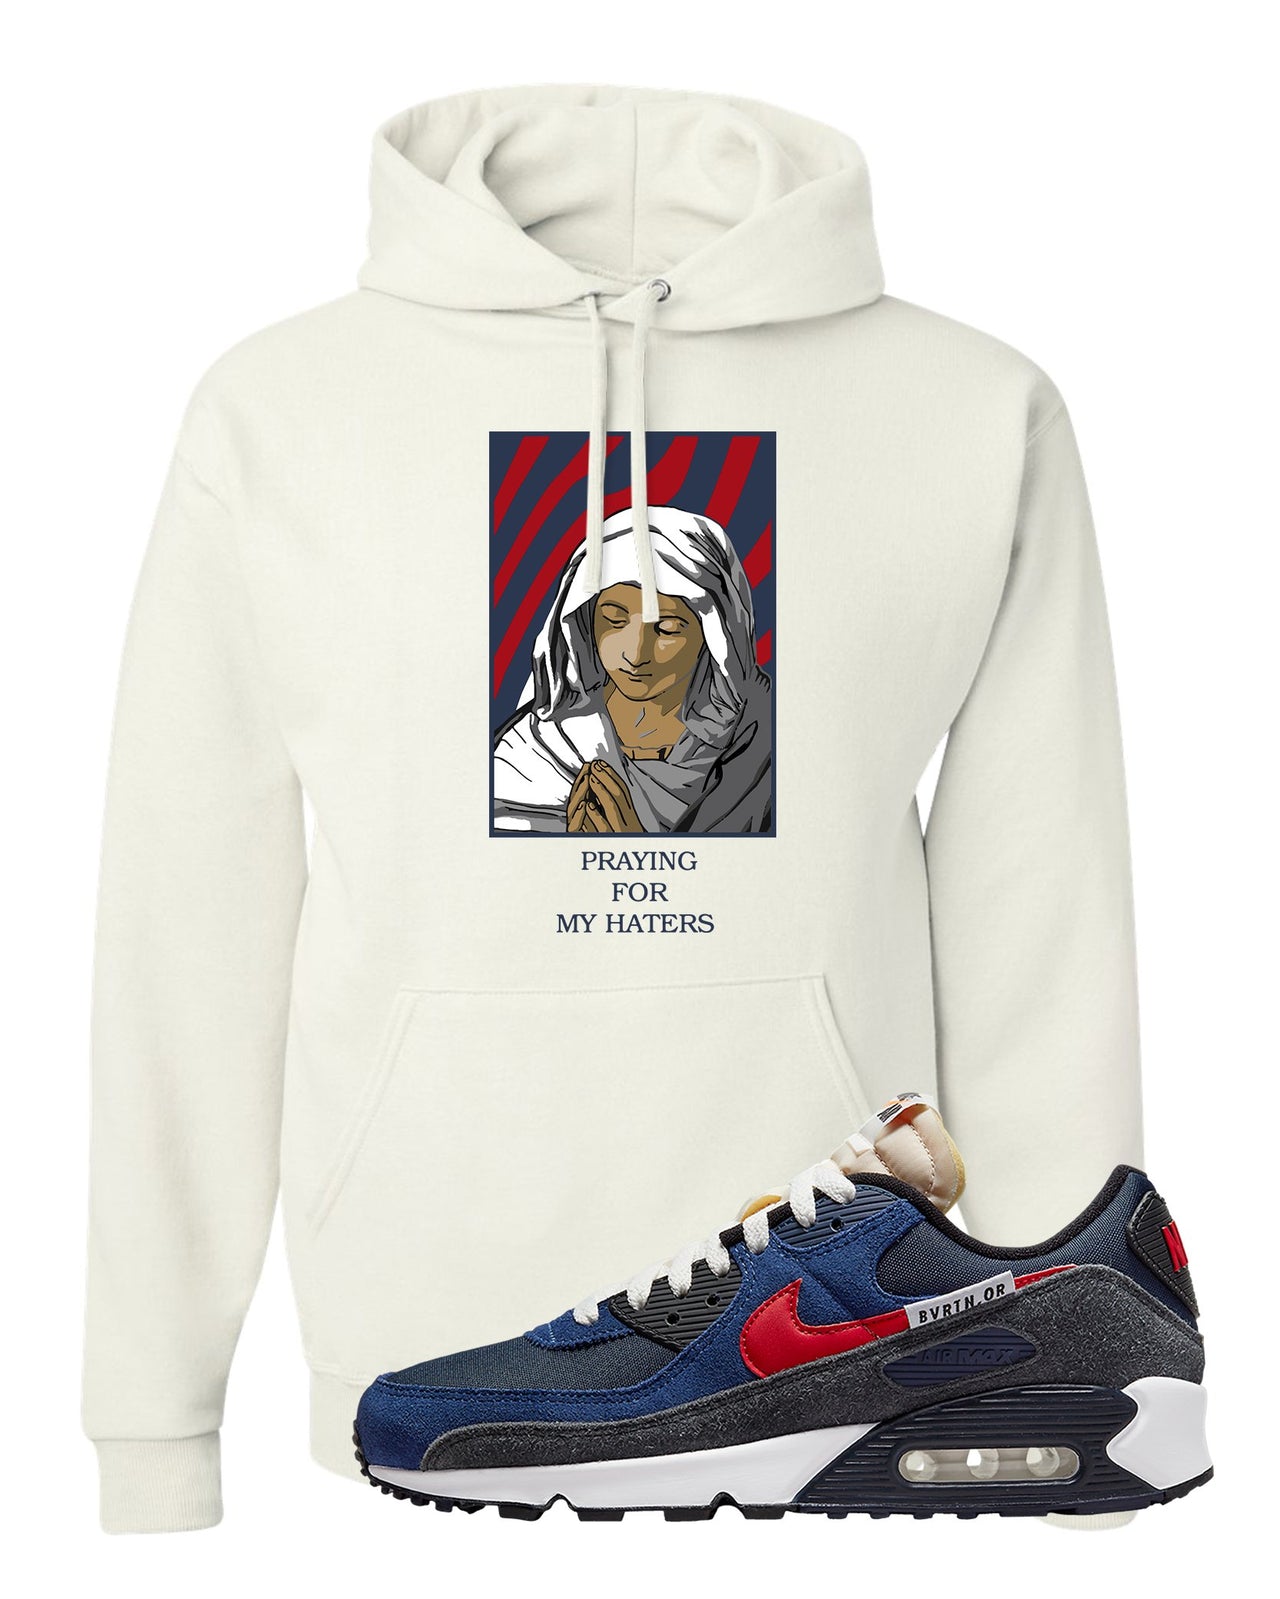 AMRC 90s Hoodie | God Told Me, White